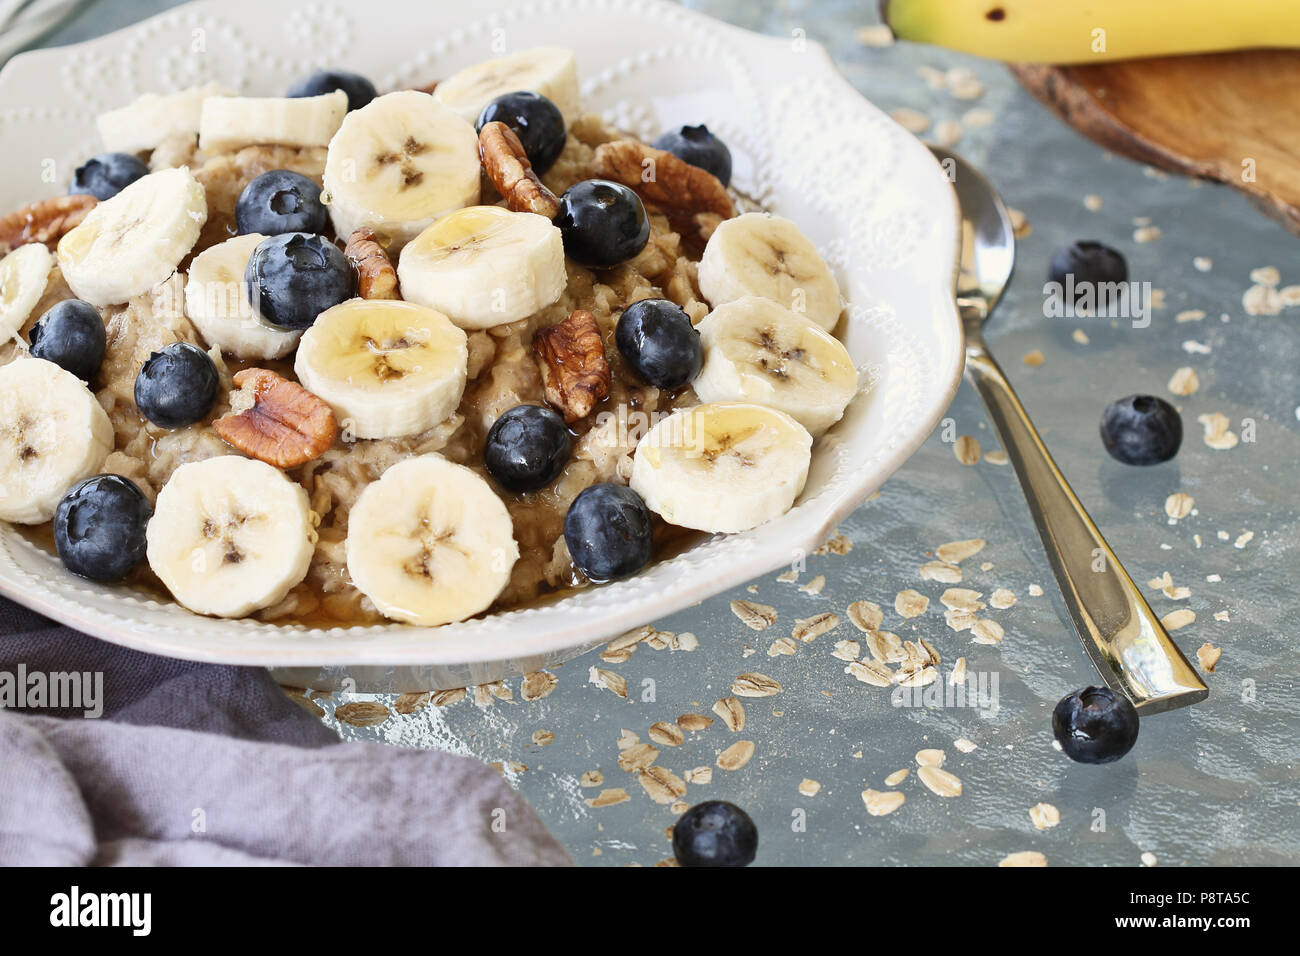 Hot breakfast of healthy oatmeal with pecans, bananas, blueberries and honey over a rustic background. Image shot from overhead. Stock Photo